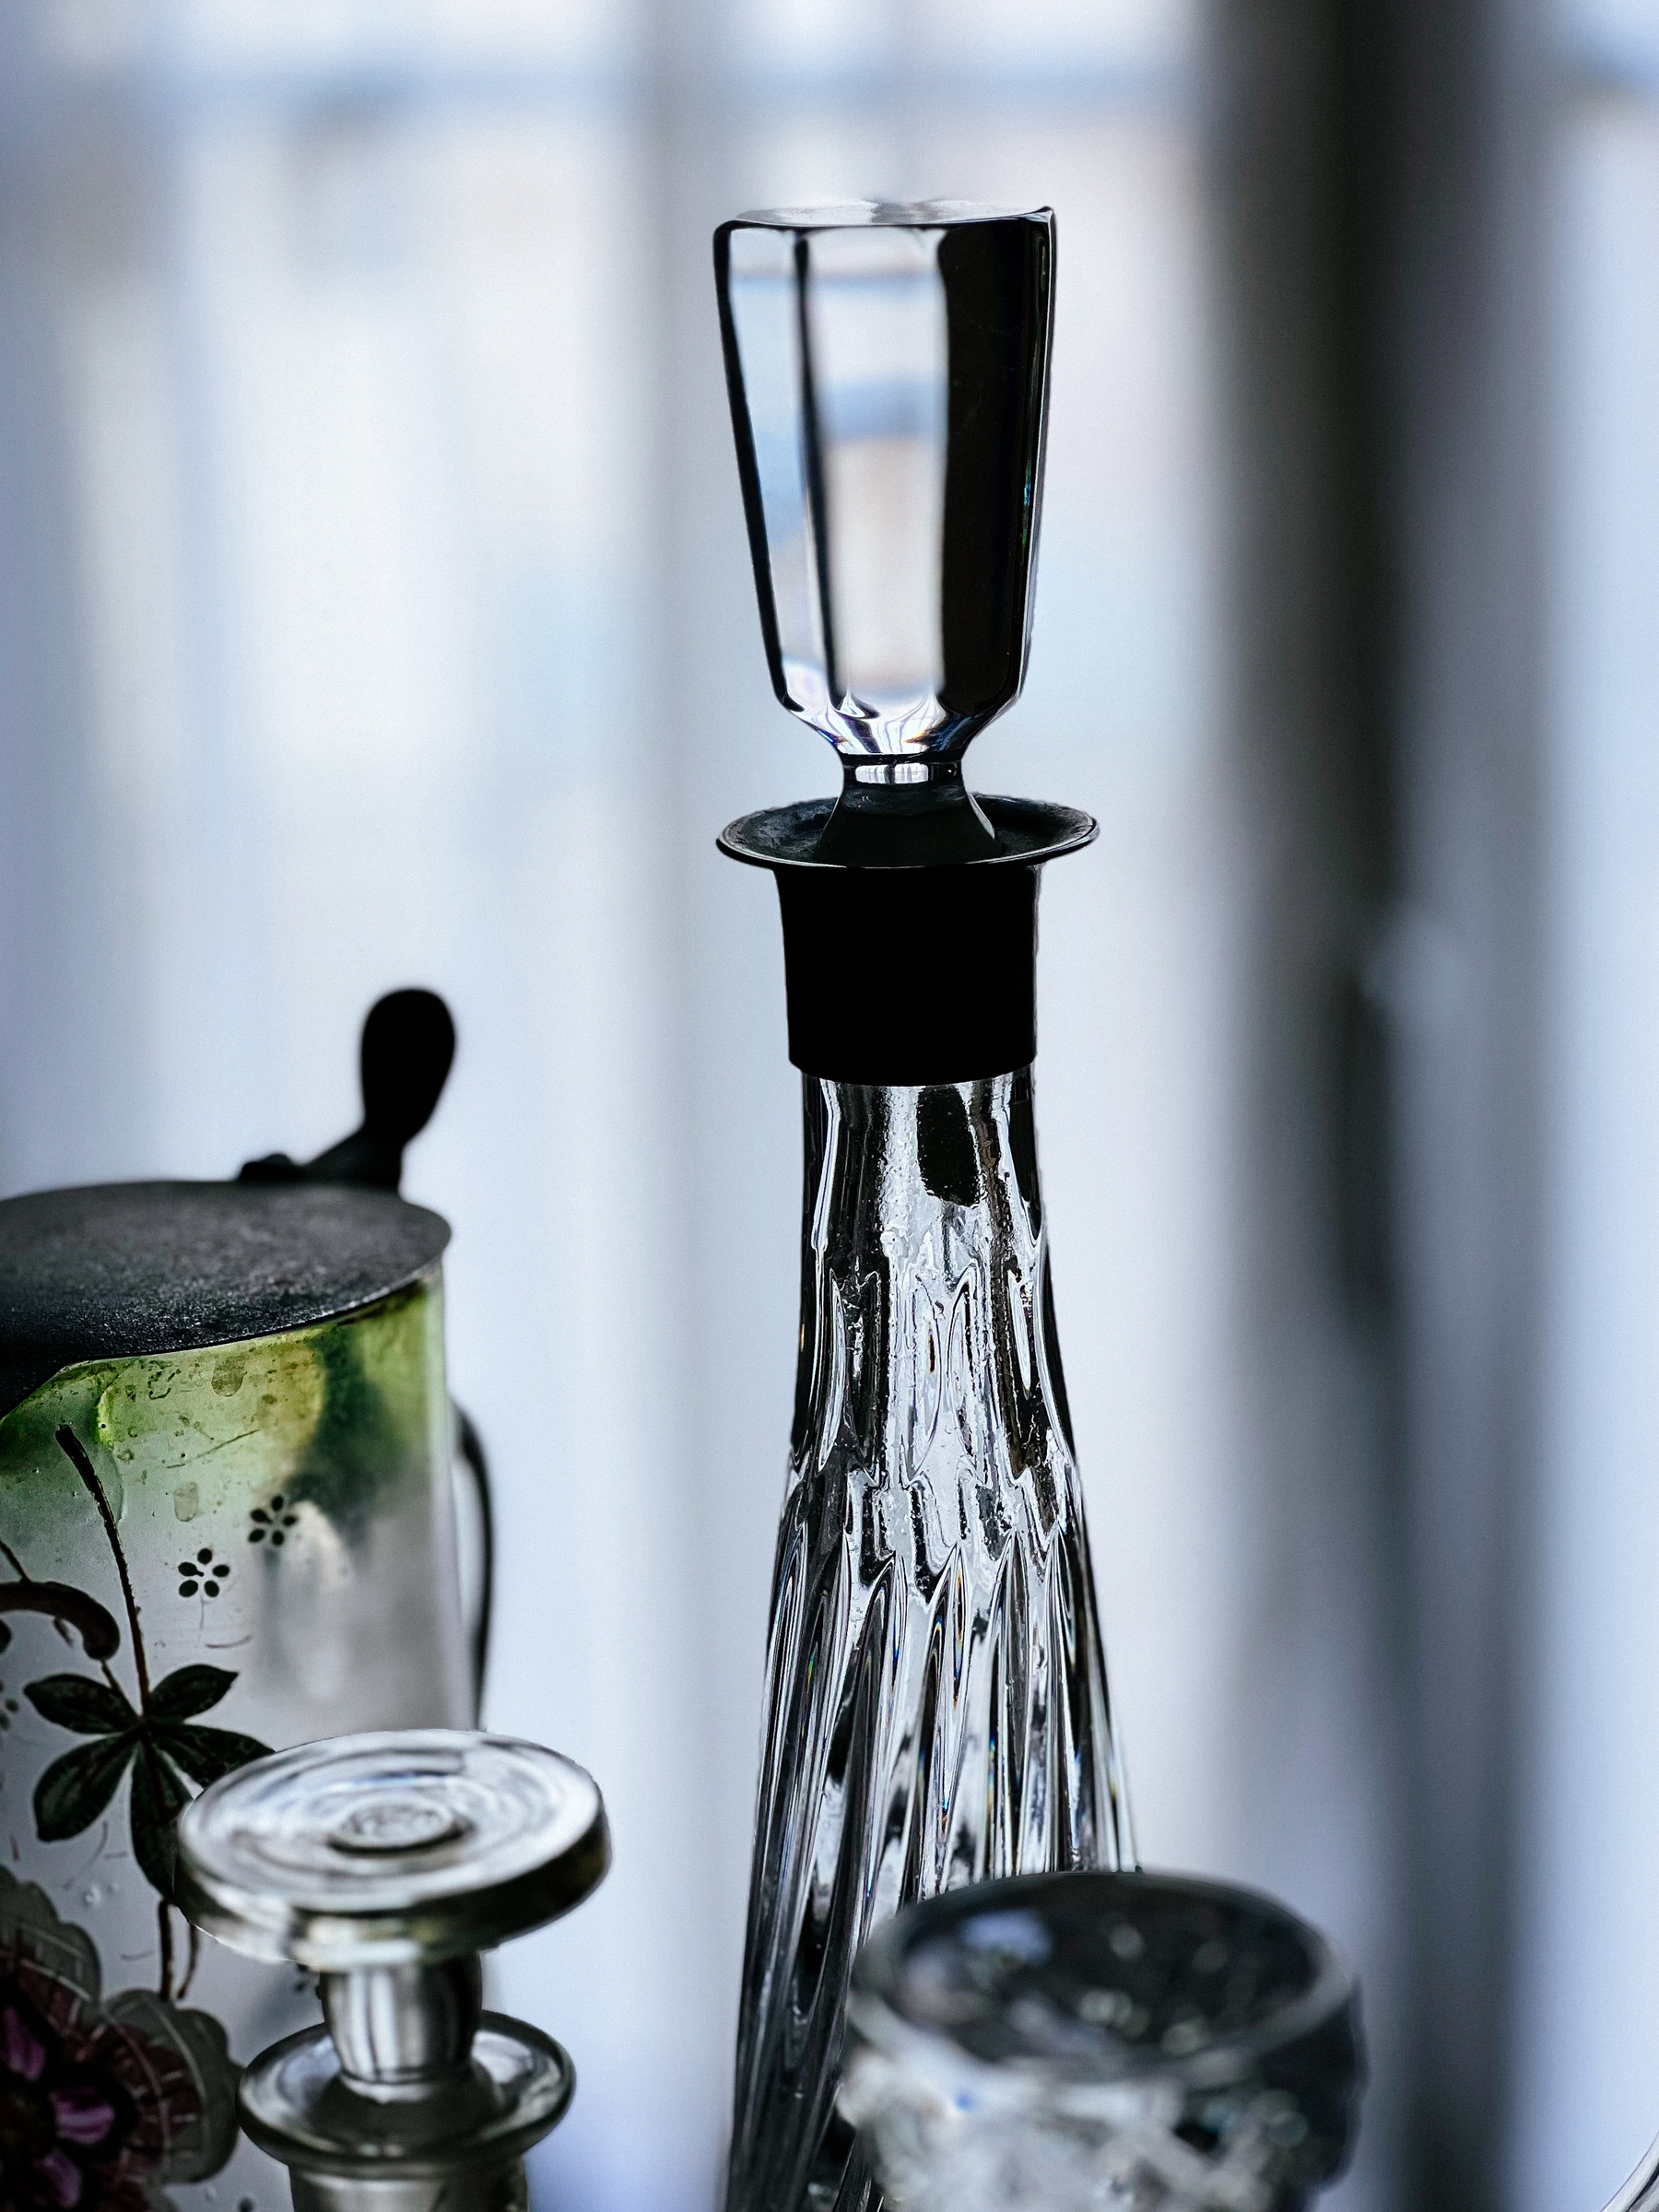 A close-up of a clear glass decanter with a stopper placed on top, surrounded by various glassware with intricate designs, set against a blurred background.